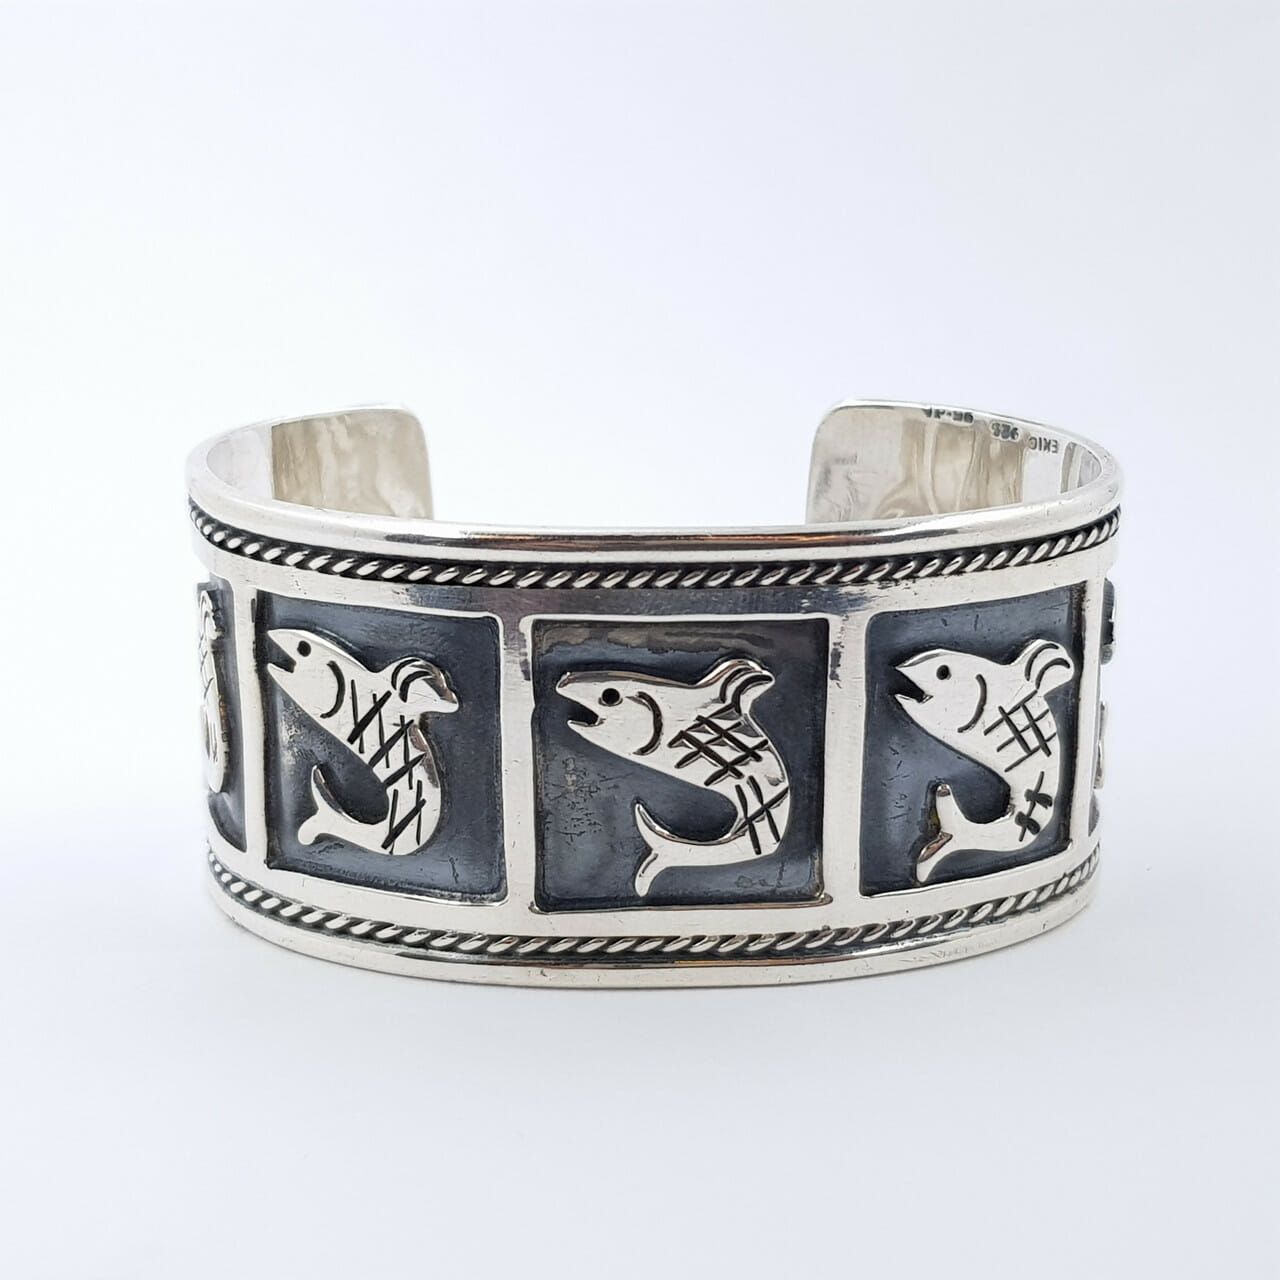 SILVER 53.2GR FISH BANGLE - MADE IN MEXICO #52011